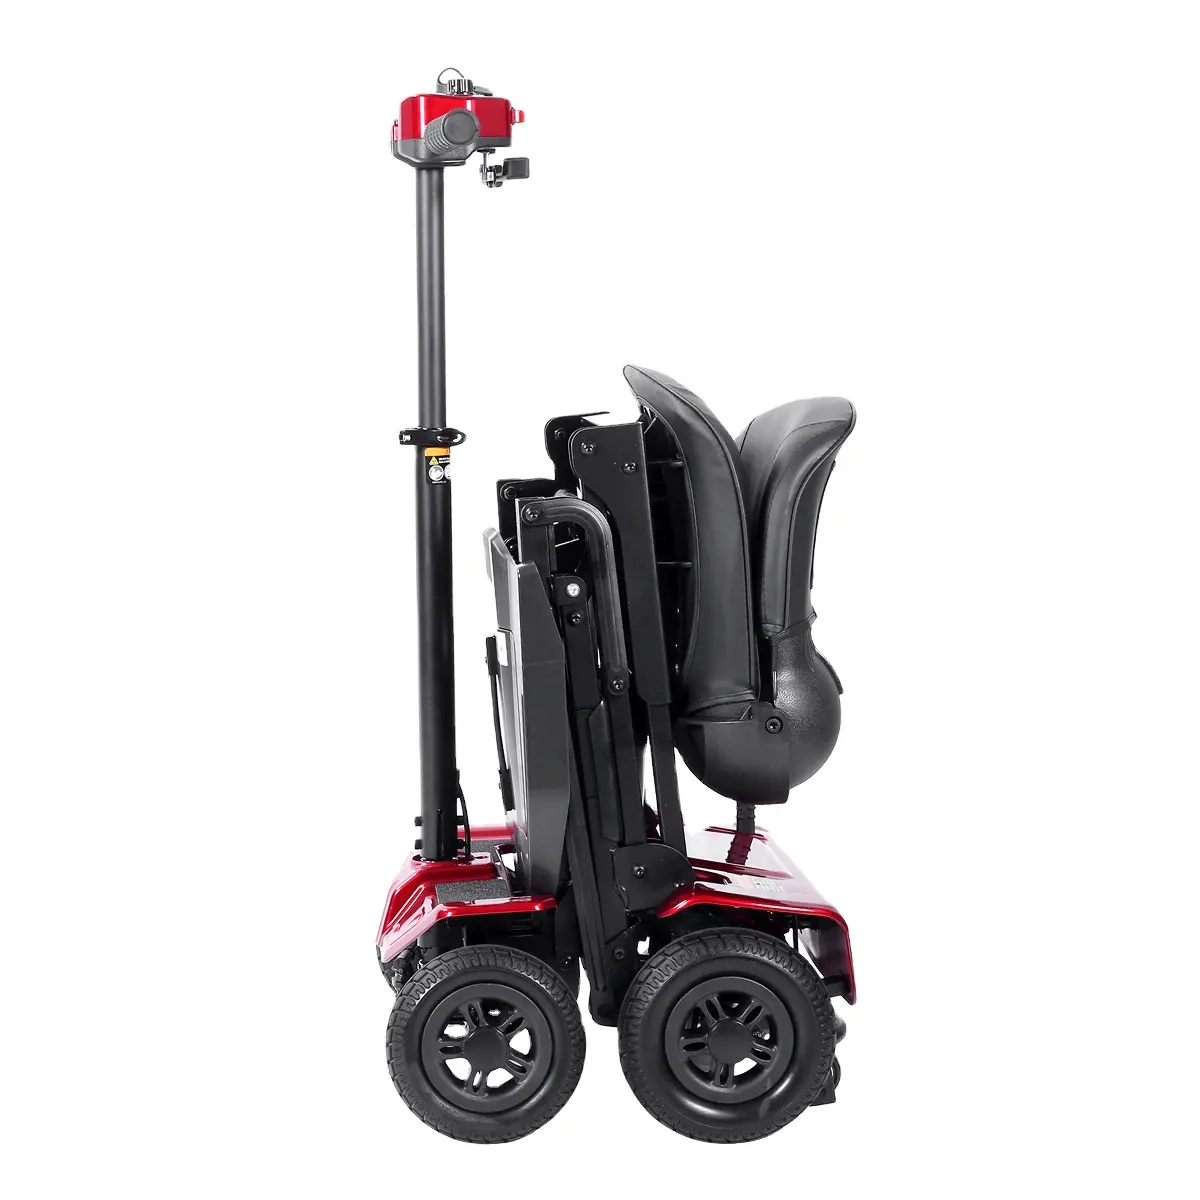 Automatic folding scooter